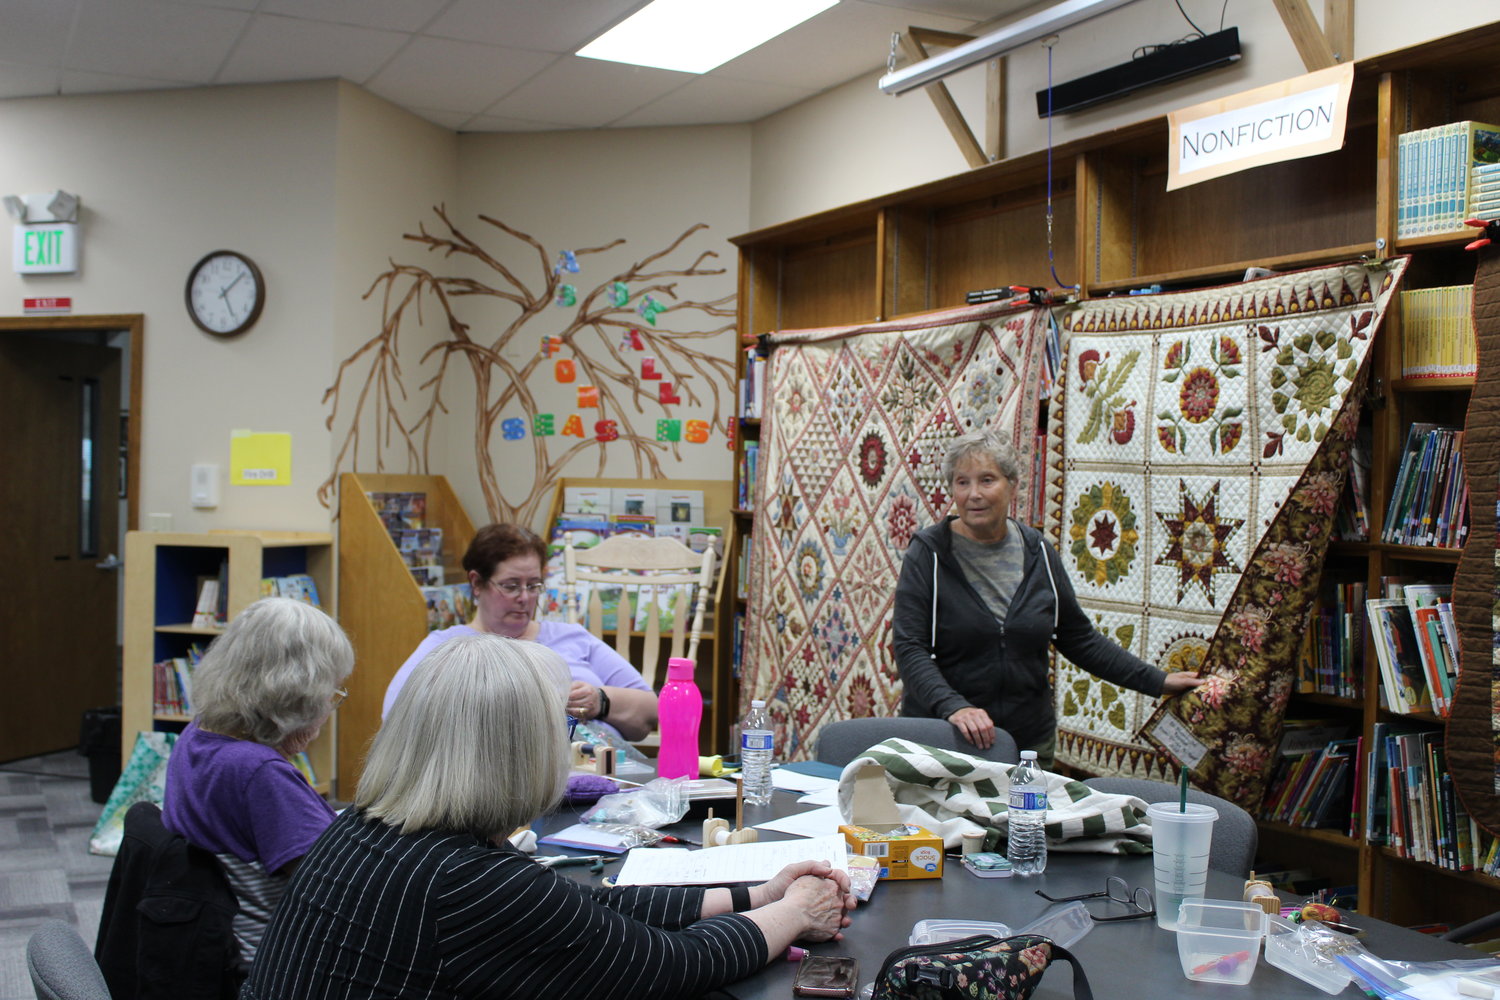 In Stitches quilt group member Geralyn Reed shows one of her completed projects to the group during one of their meetups. Members celebrate each completed piece by singing "Happy Quilting to You" sung to the tune of the birthday song and by enjoying homemade treats.